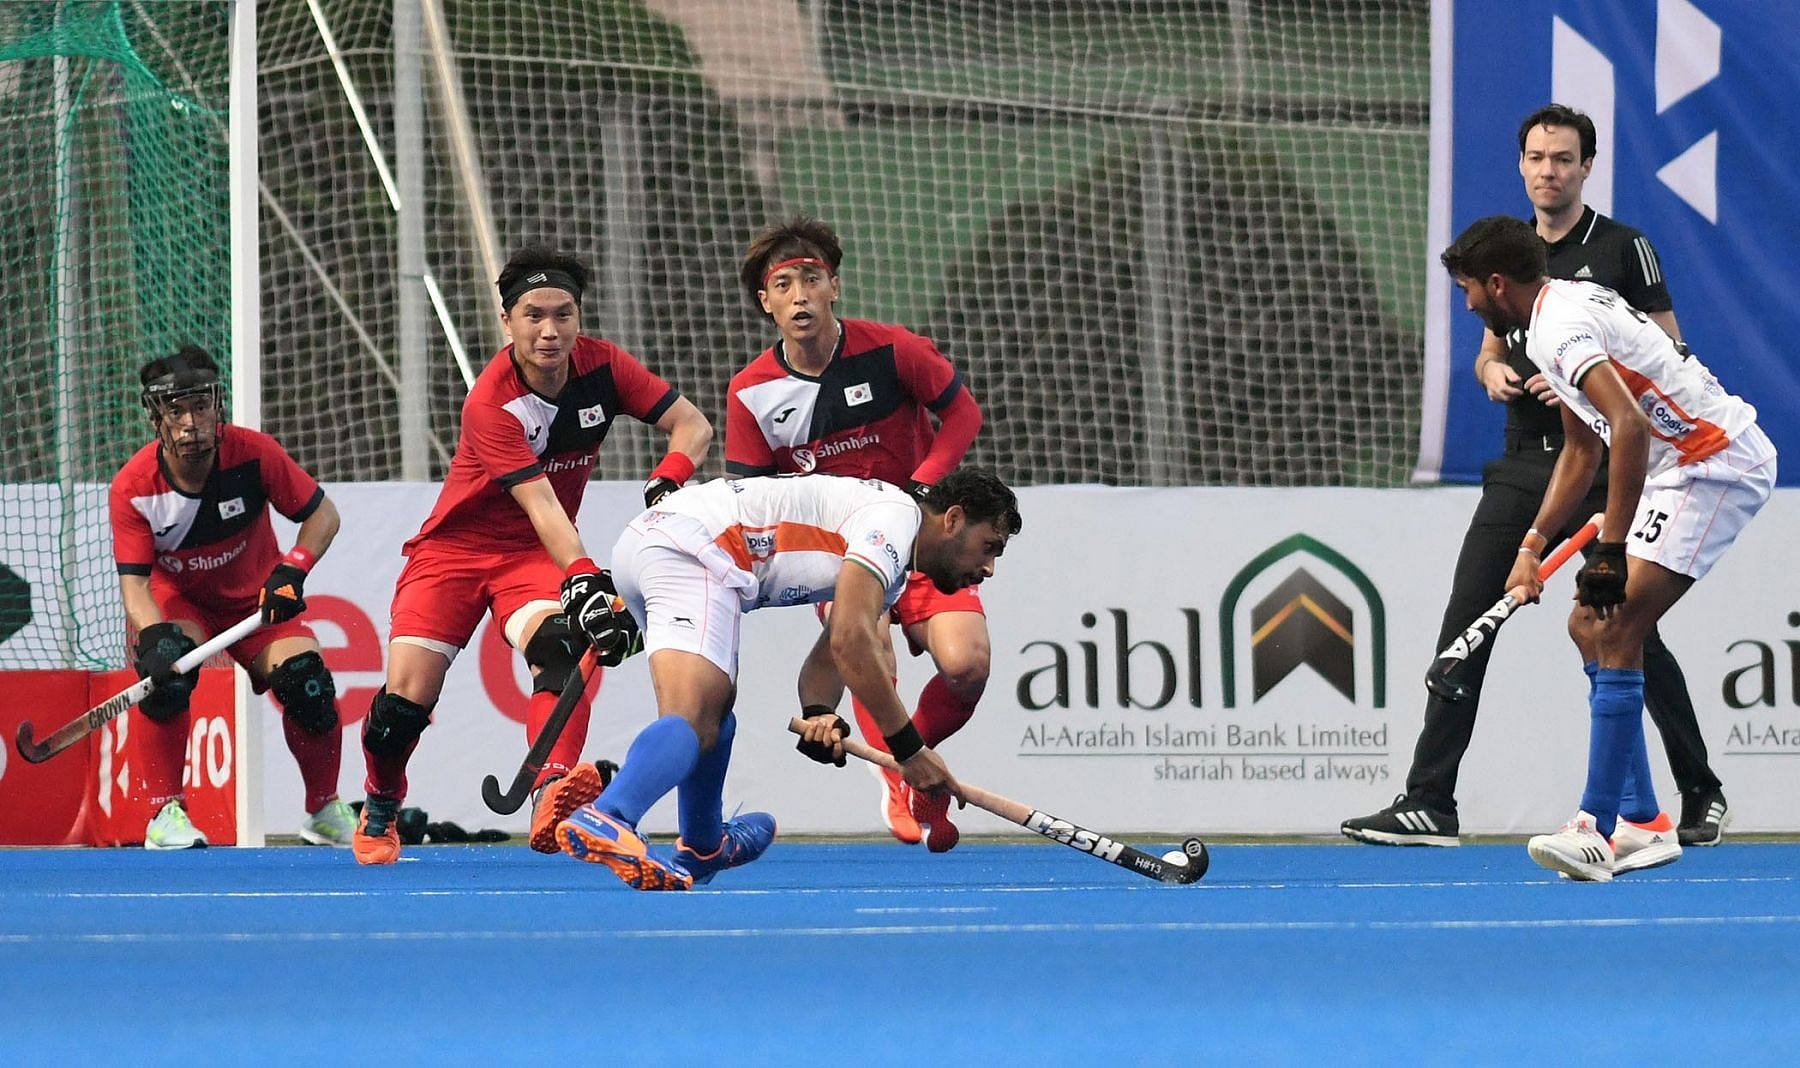 The Indian team in action against Korea at the Asian Champions Trophy. (PC: Hockey India)